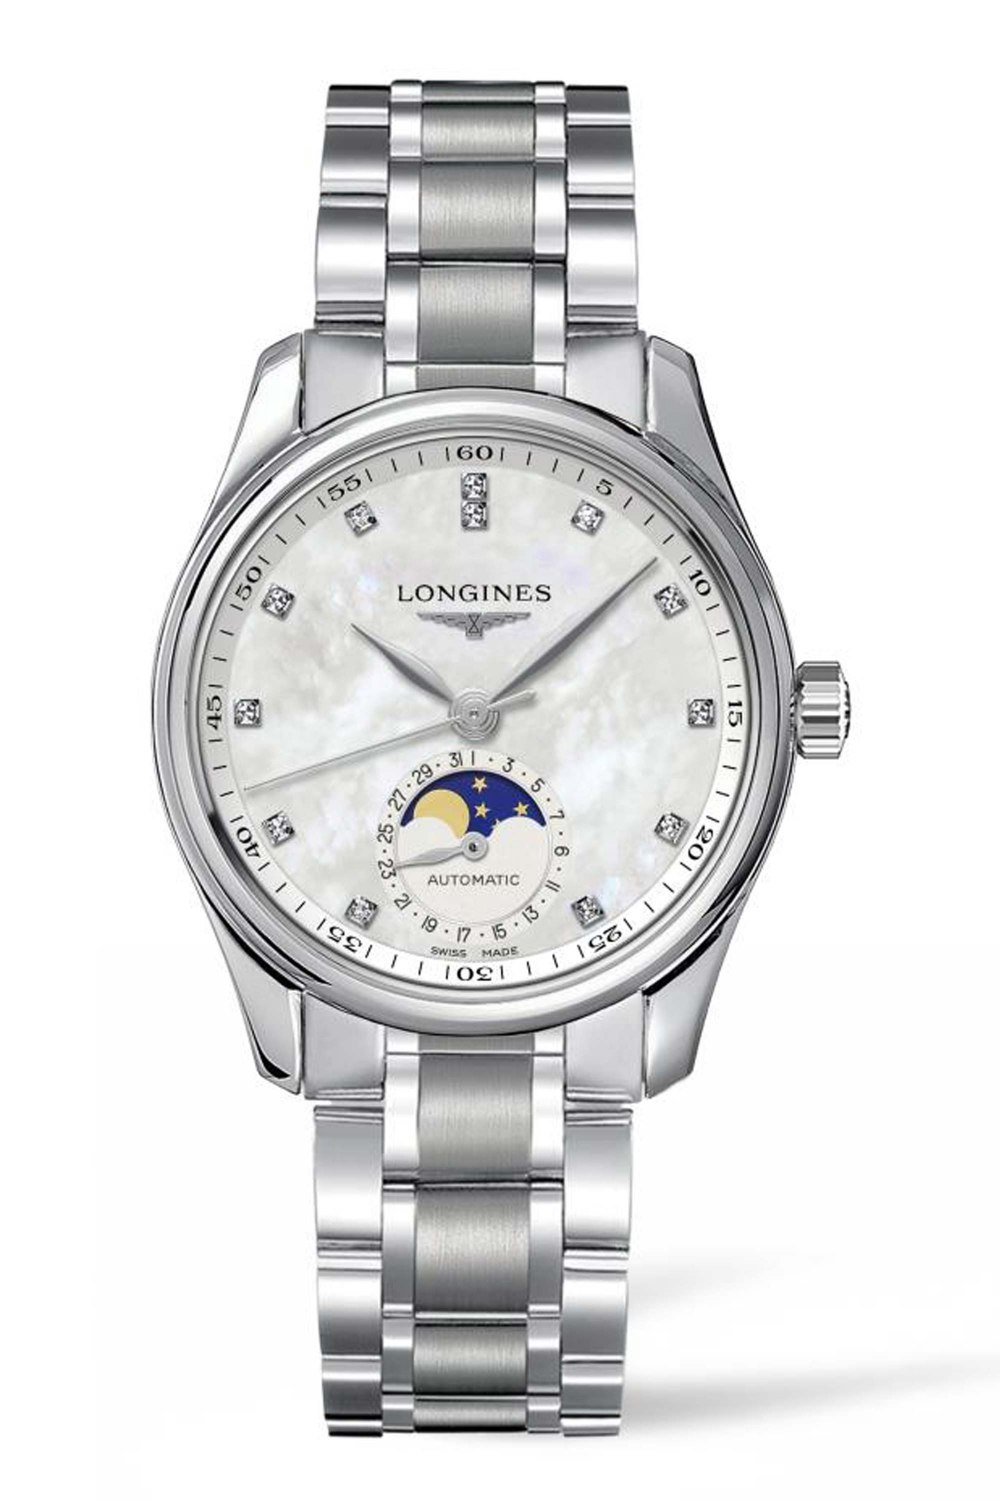 LONGINES - The Longines Master Collection